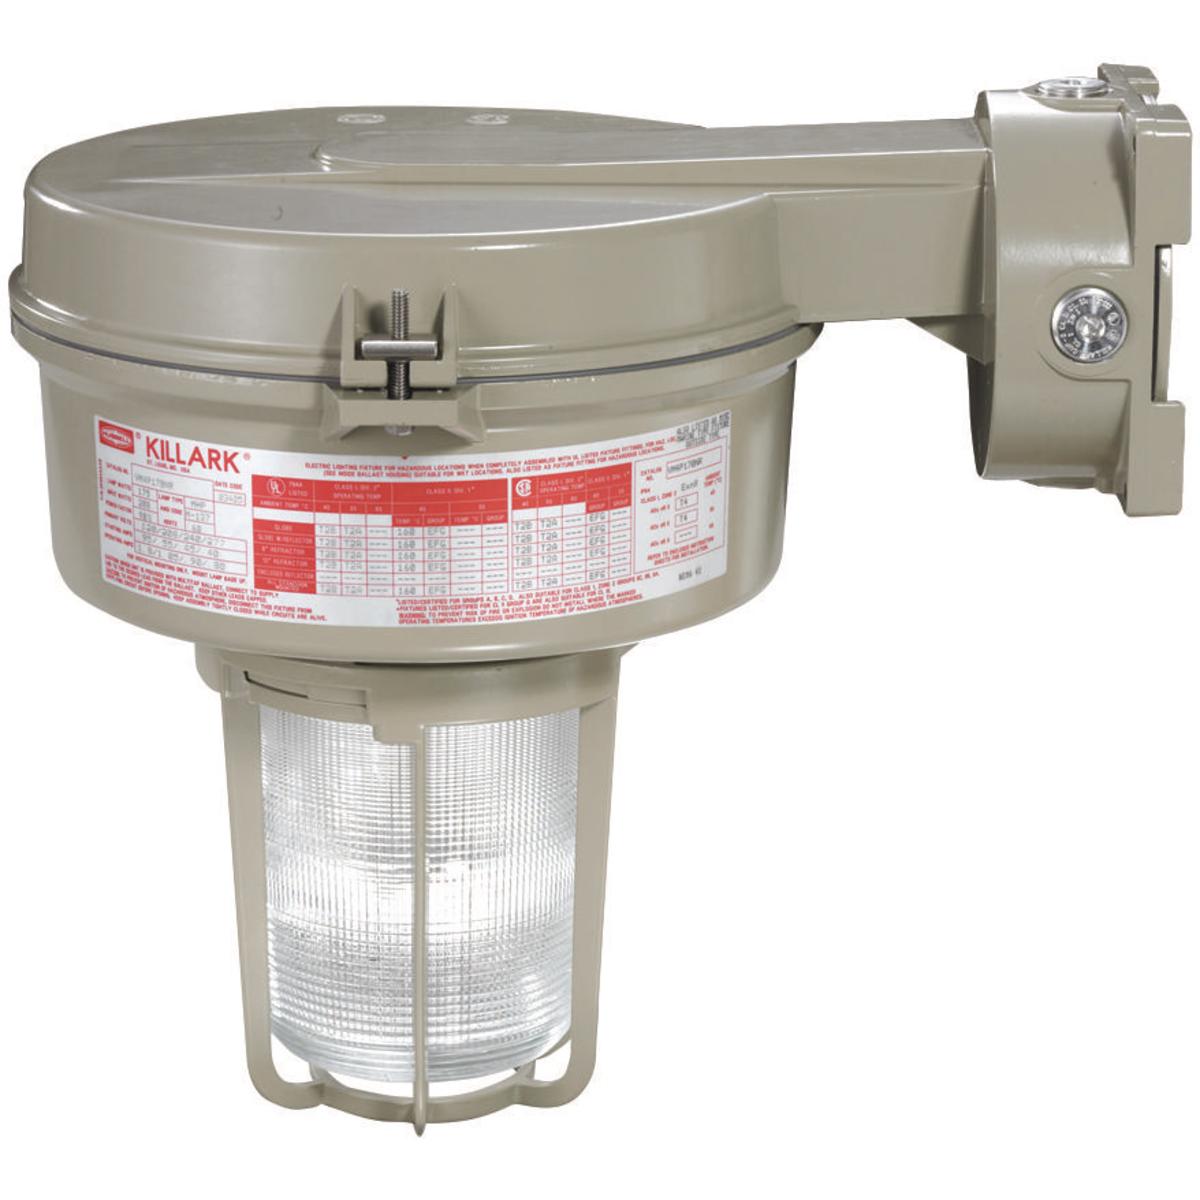 Hubbell VM3H100B2R1G VM3 Series - 100W Metal Halide Quadri-Volt - 3/4" Wall Mount - Type I Glass Refractor and Guard  ; Ballast tank and splice box – corrosion resistant copper-free aluminum alloy with baked powder epoxy/polyester finish, electrostatically applied for complet